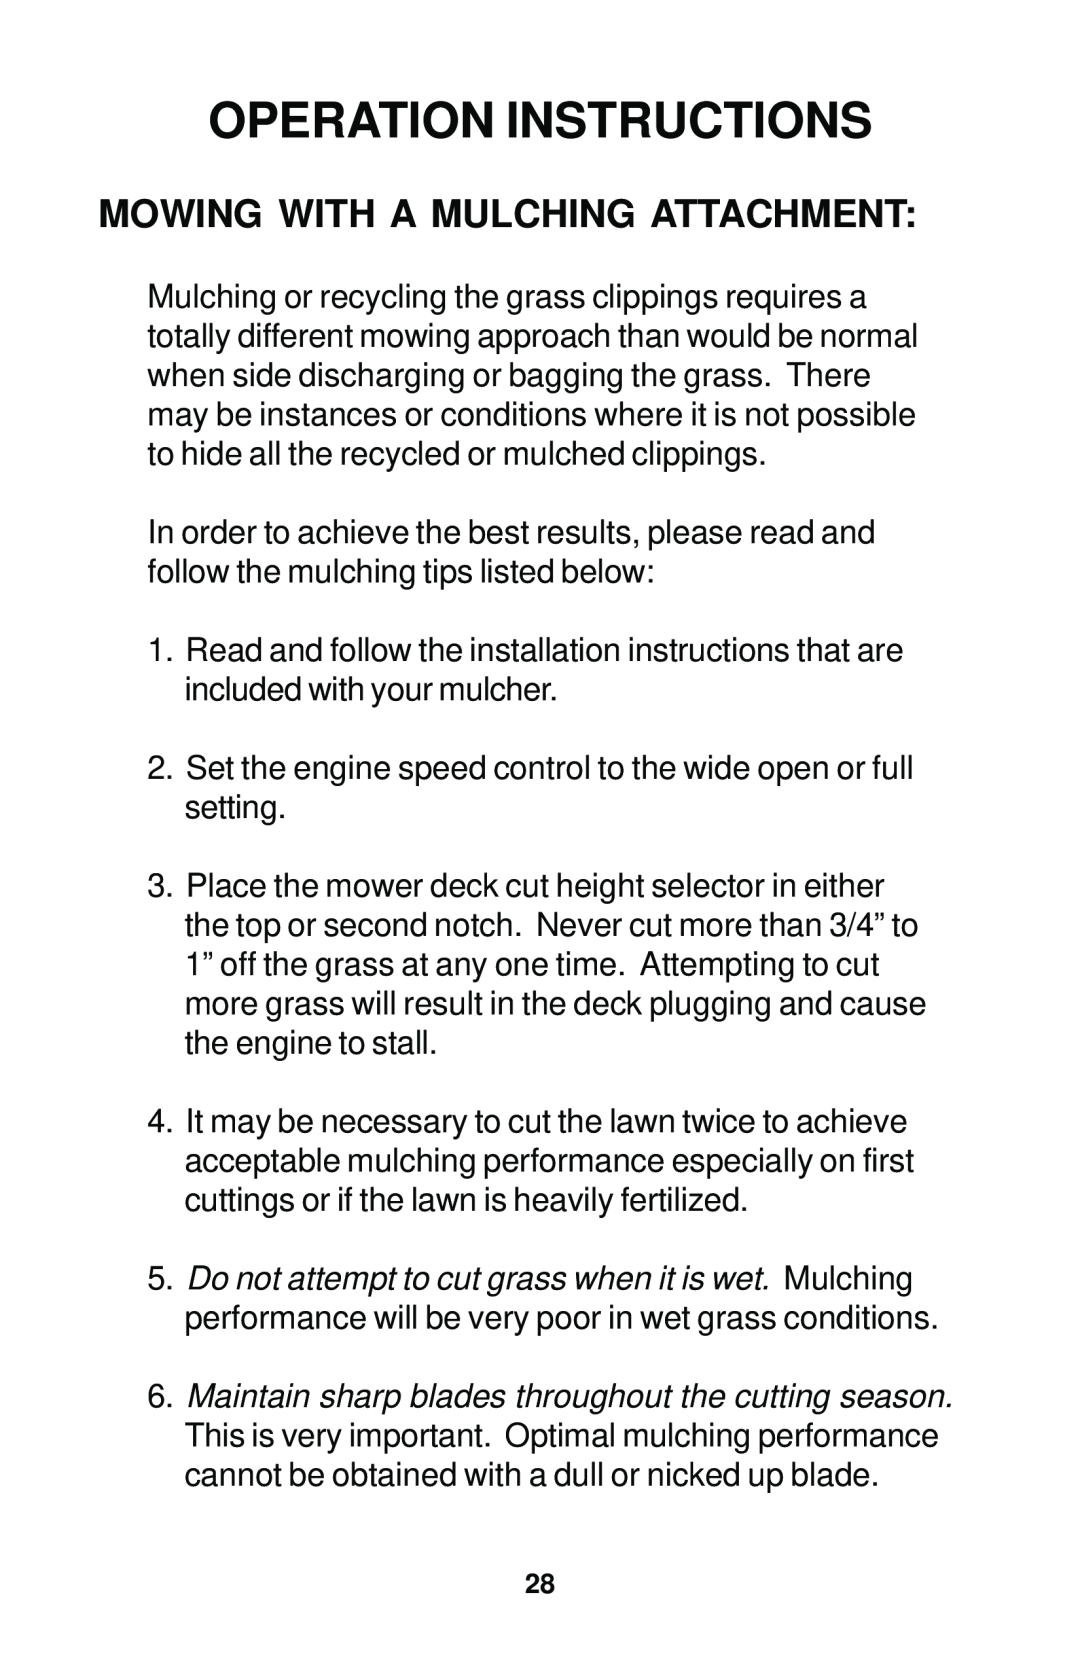 Dixon 12881-1104 manual Mowing With A Mulching Attachment, Operation Instructions 